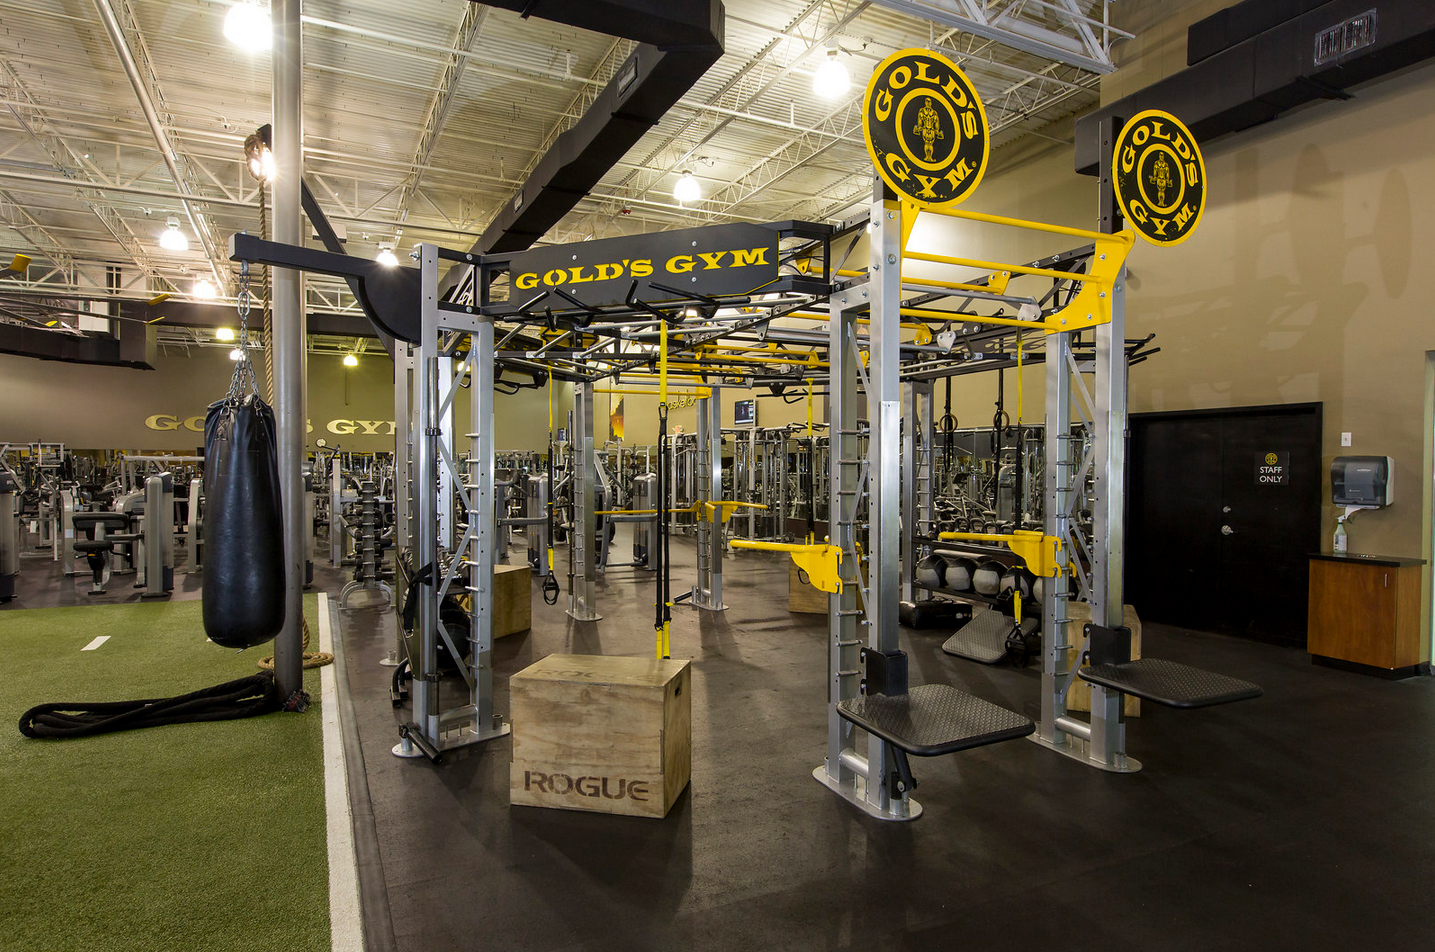 Golds' Gym Winter Haven features larger training areas and equipment upgrades for members